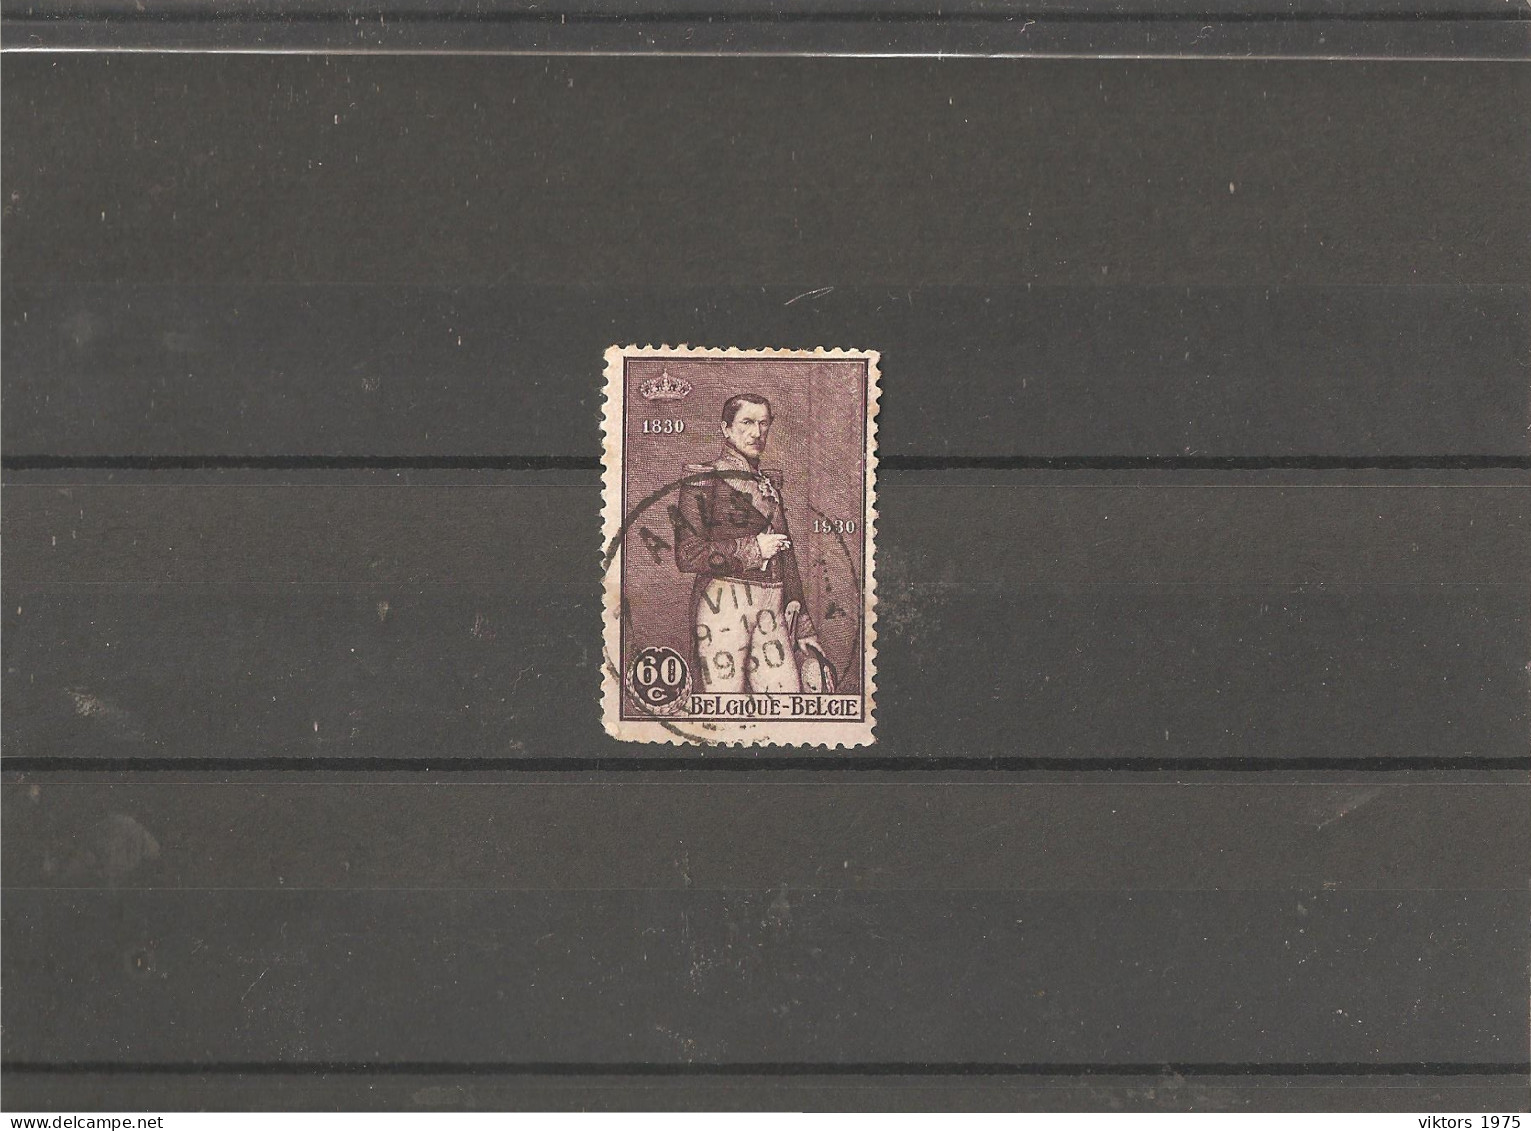 Used Stamp Nr.284 In MICHEL Catalog - Used Stamps